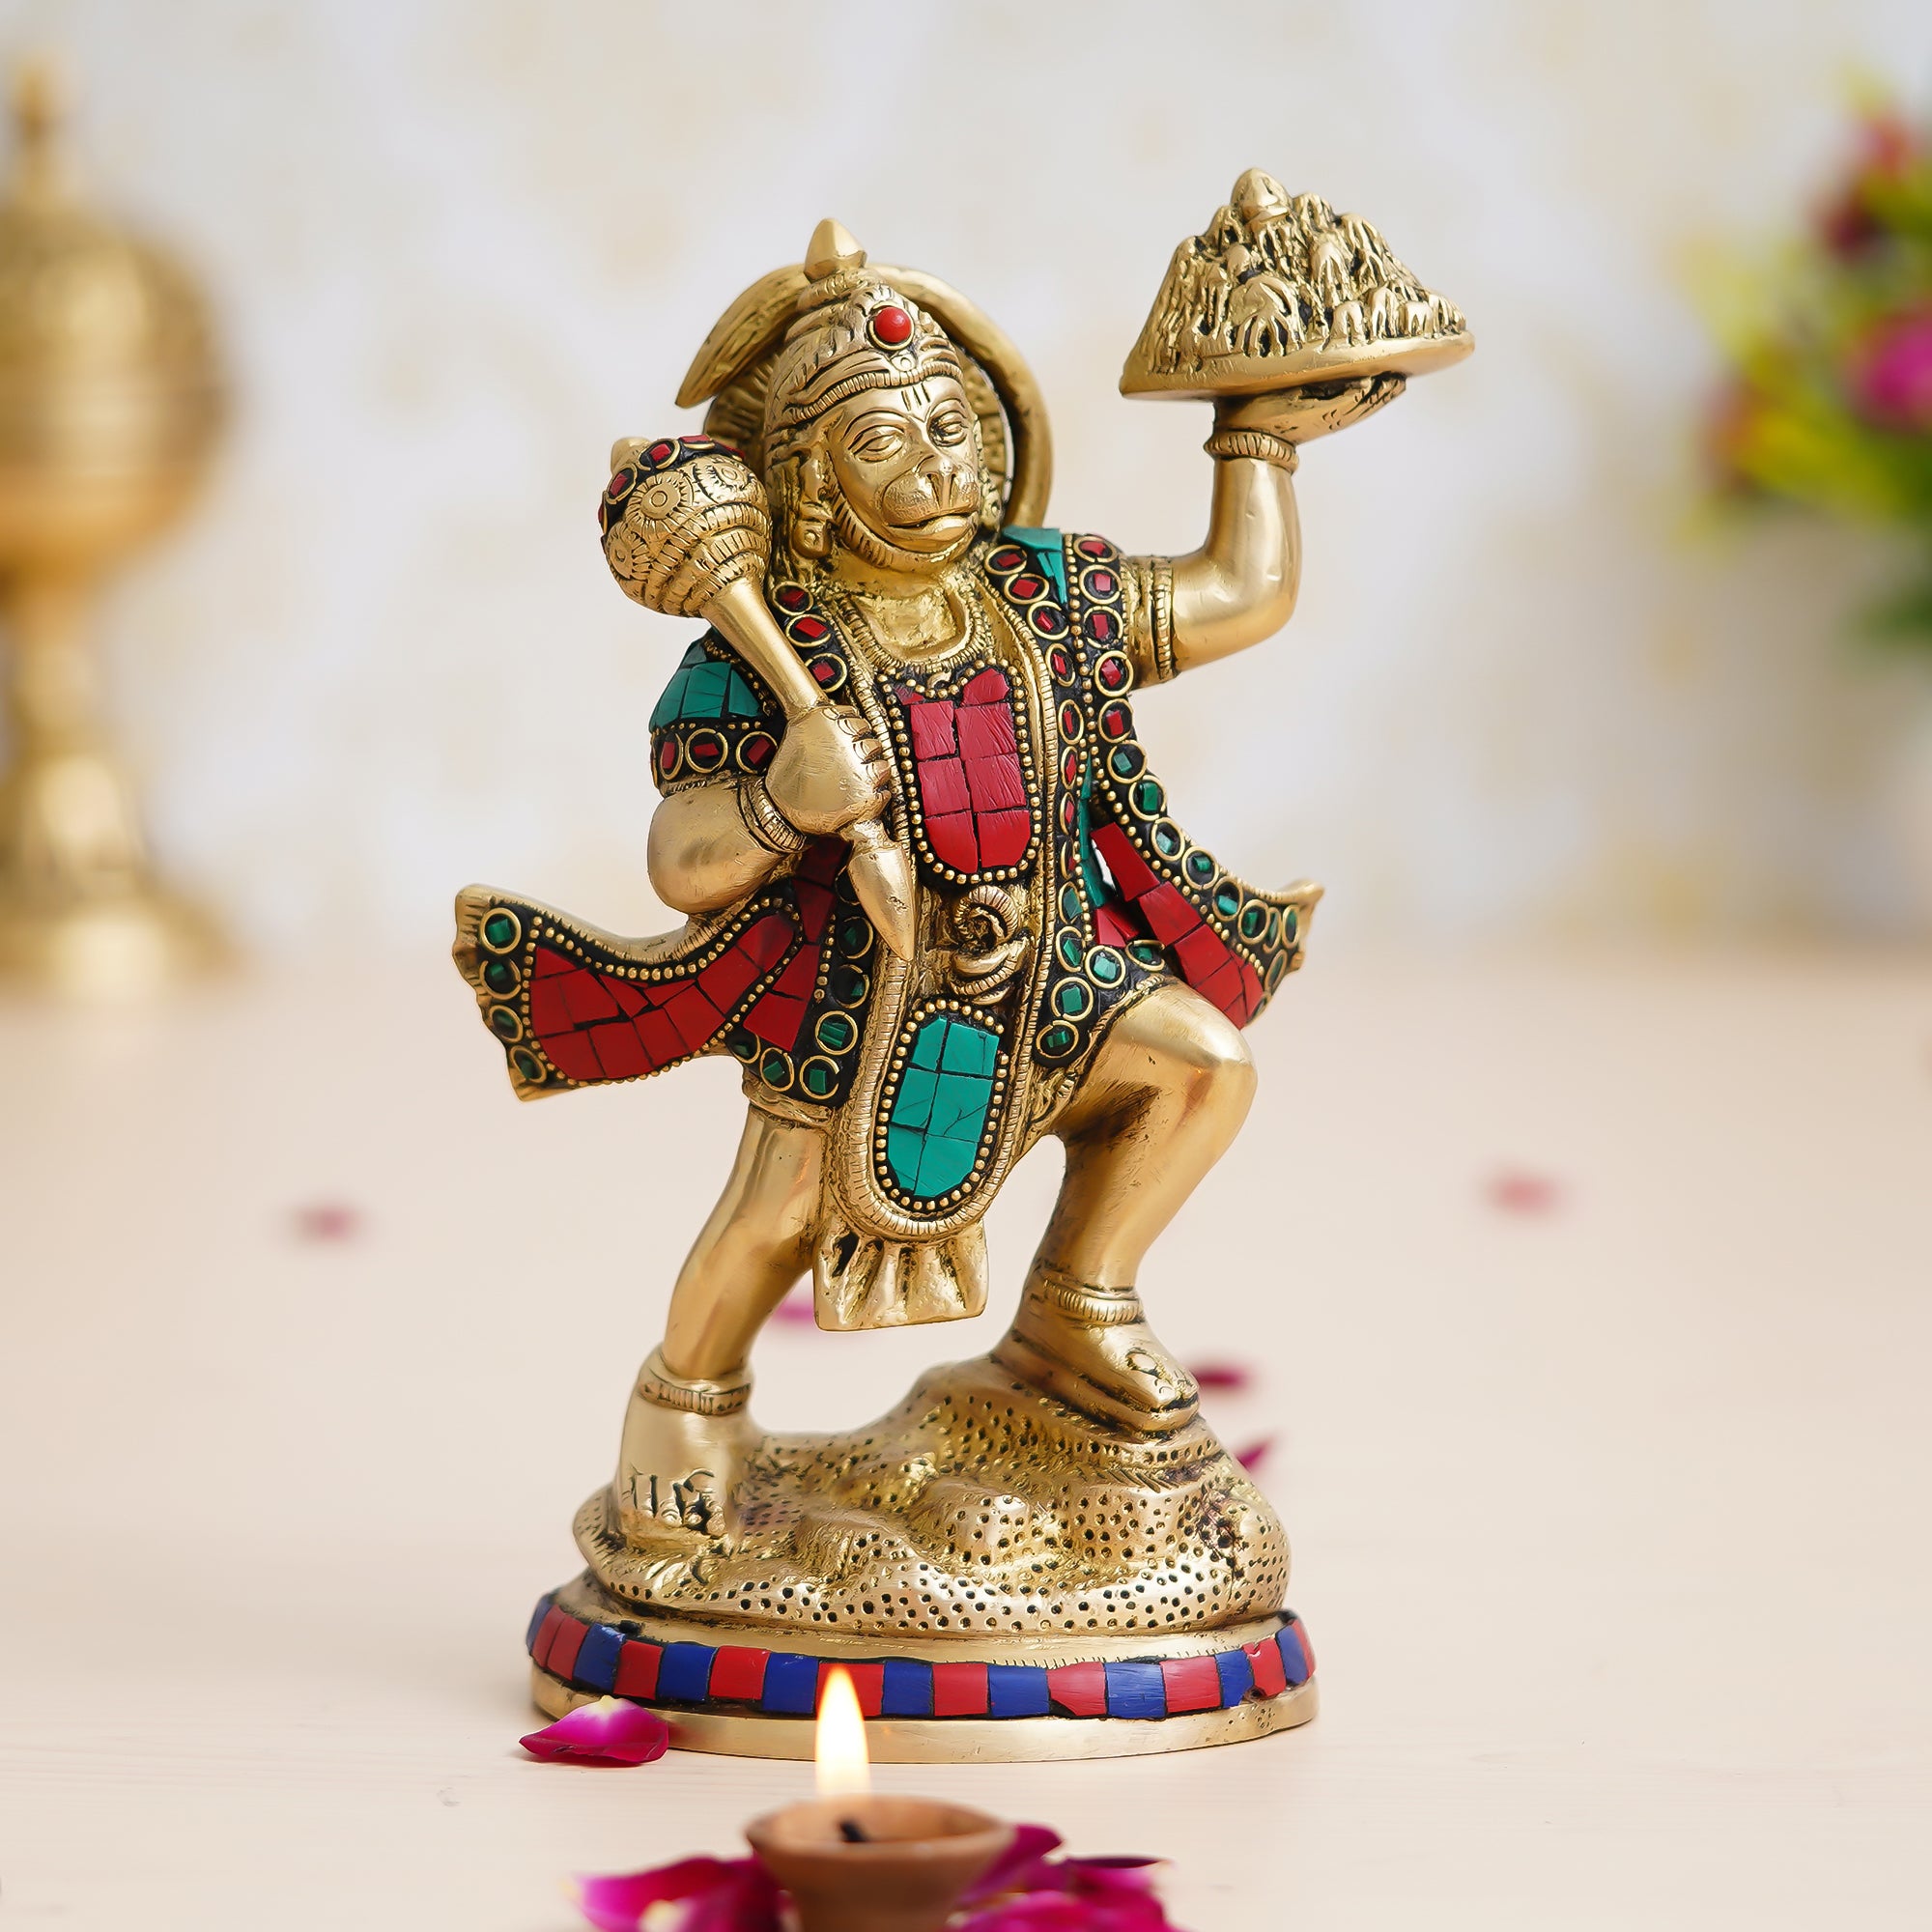 Colorful Stone Work Handcrafted Brass Lord Hanuman Statue Carrying Sanjeevani Mountain